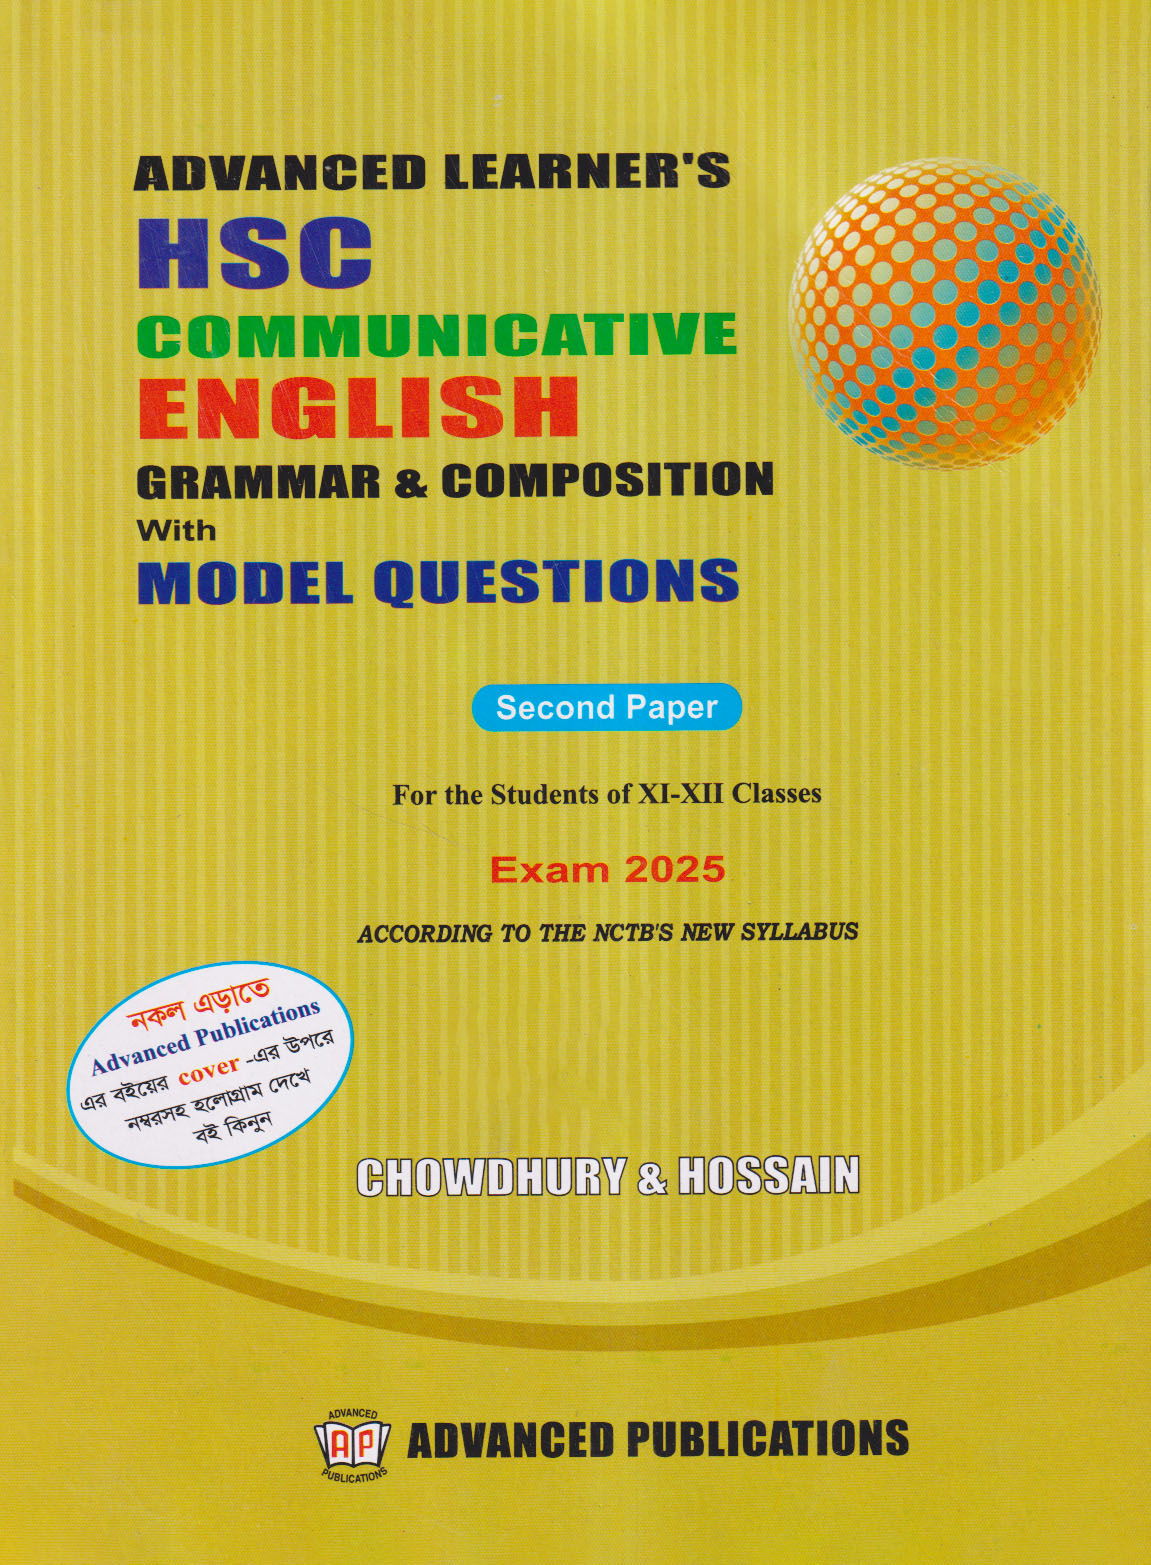 Advanced Learners HSC Communicative English Grammar & Composition With Model Questions Second Paper (পেপারব্যাক)